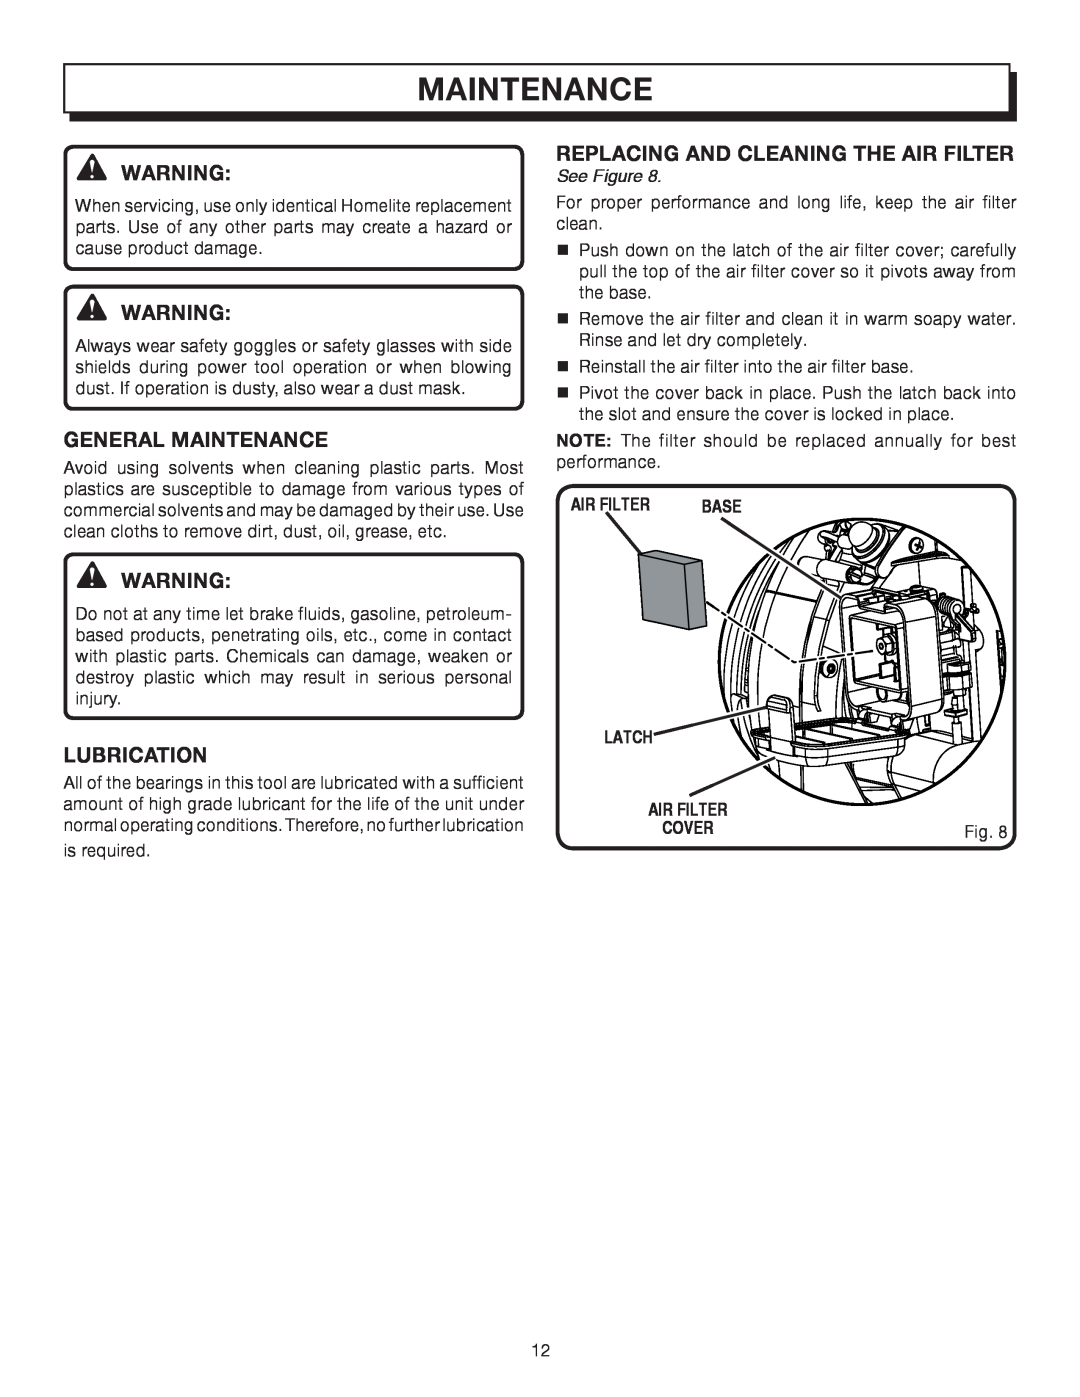 Homelite UT08512, UT08012 manual Maintenance, Replacing And Cleaning The Air Filter, See Figure, Latch 